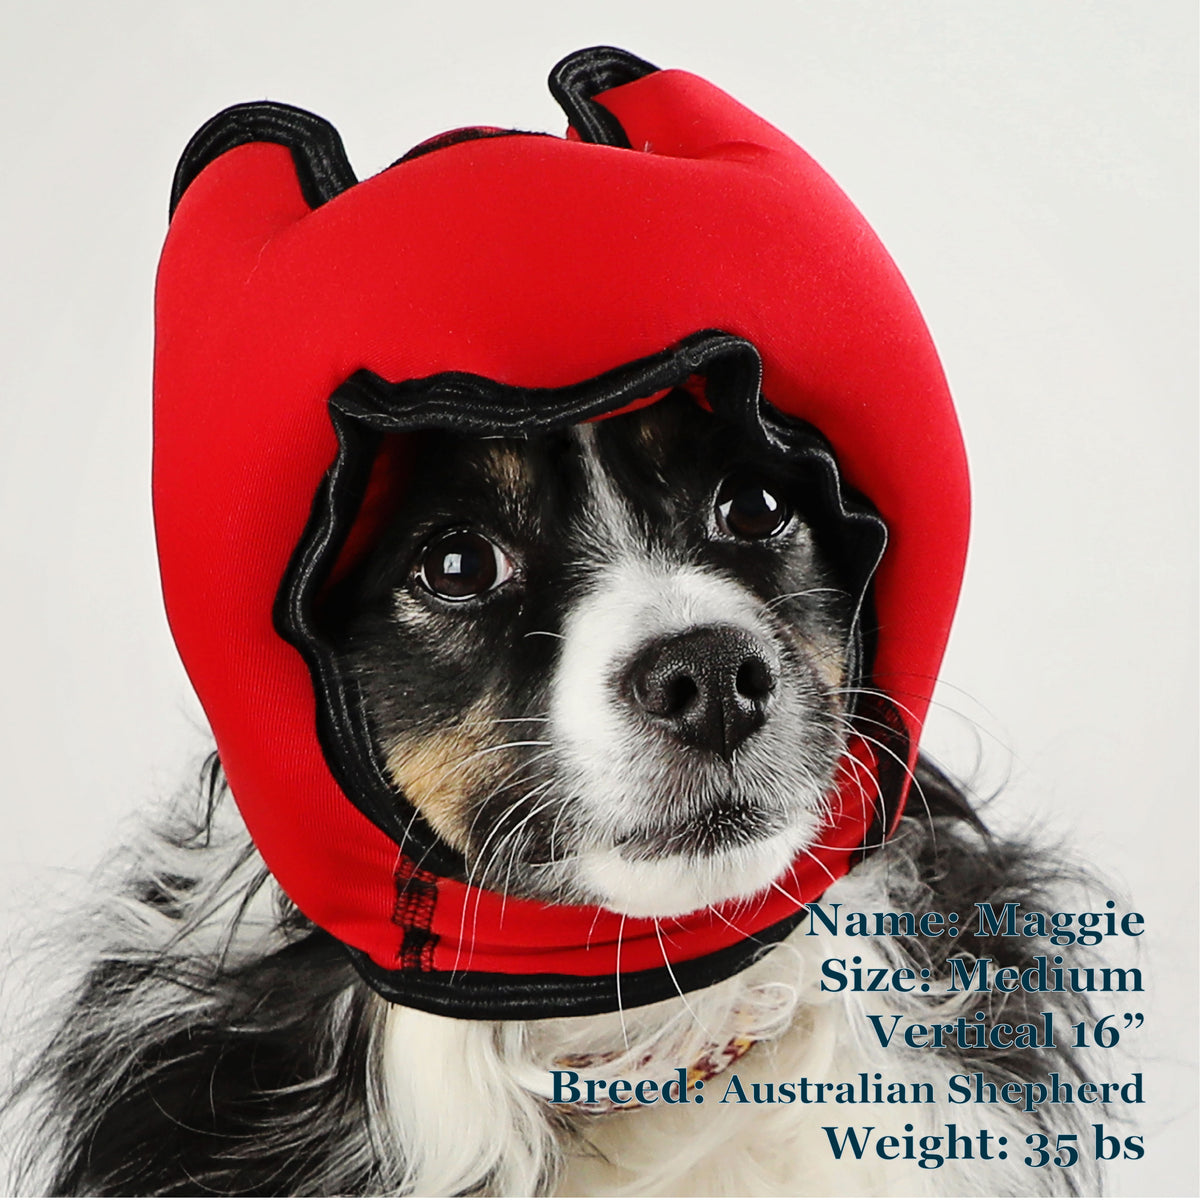 Maggie is a Australian Shepherd in a Medium Red PAWNIX Noise Cancelling Headset for dogs